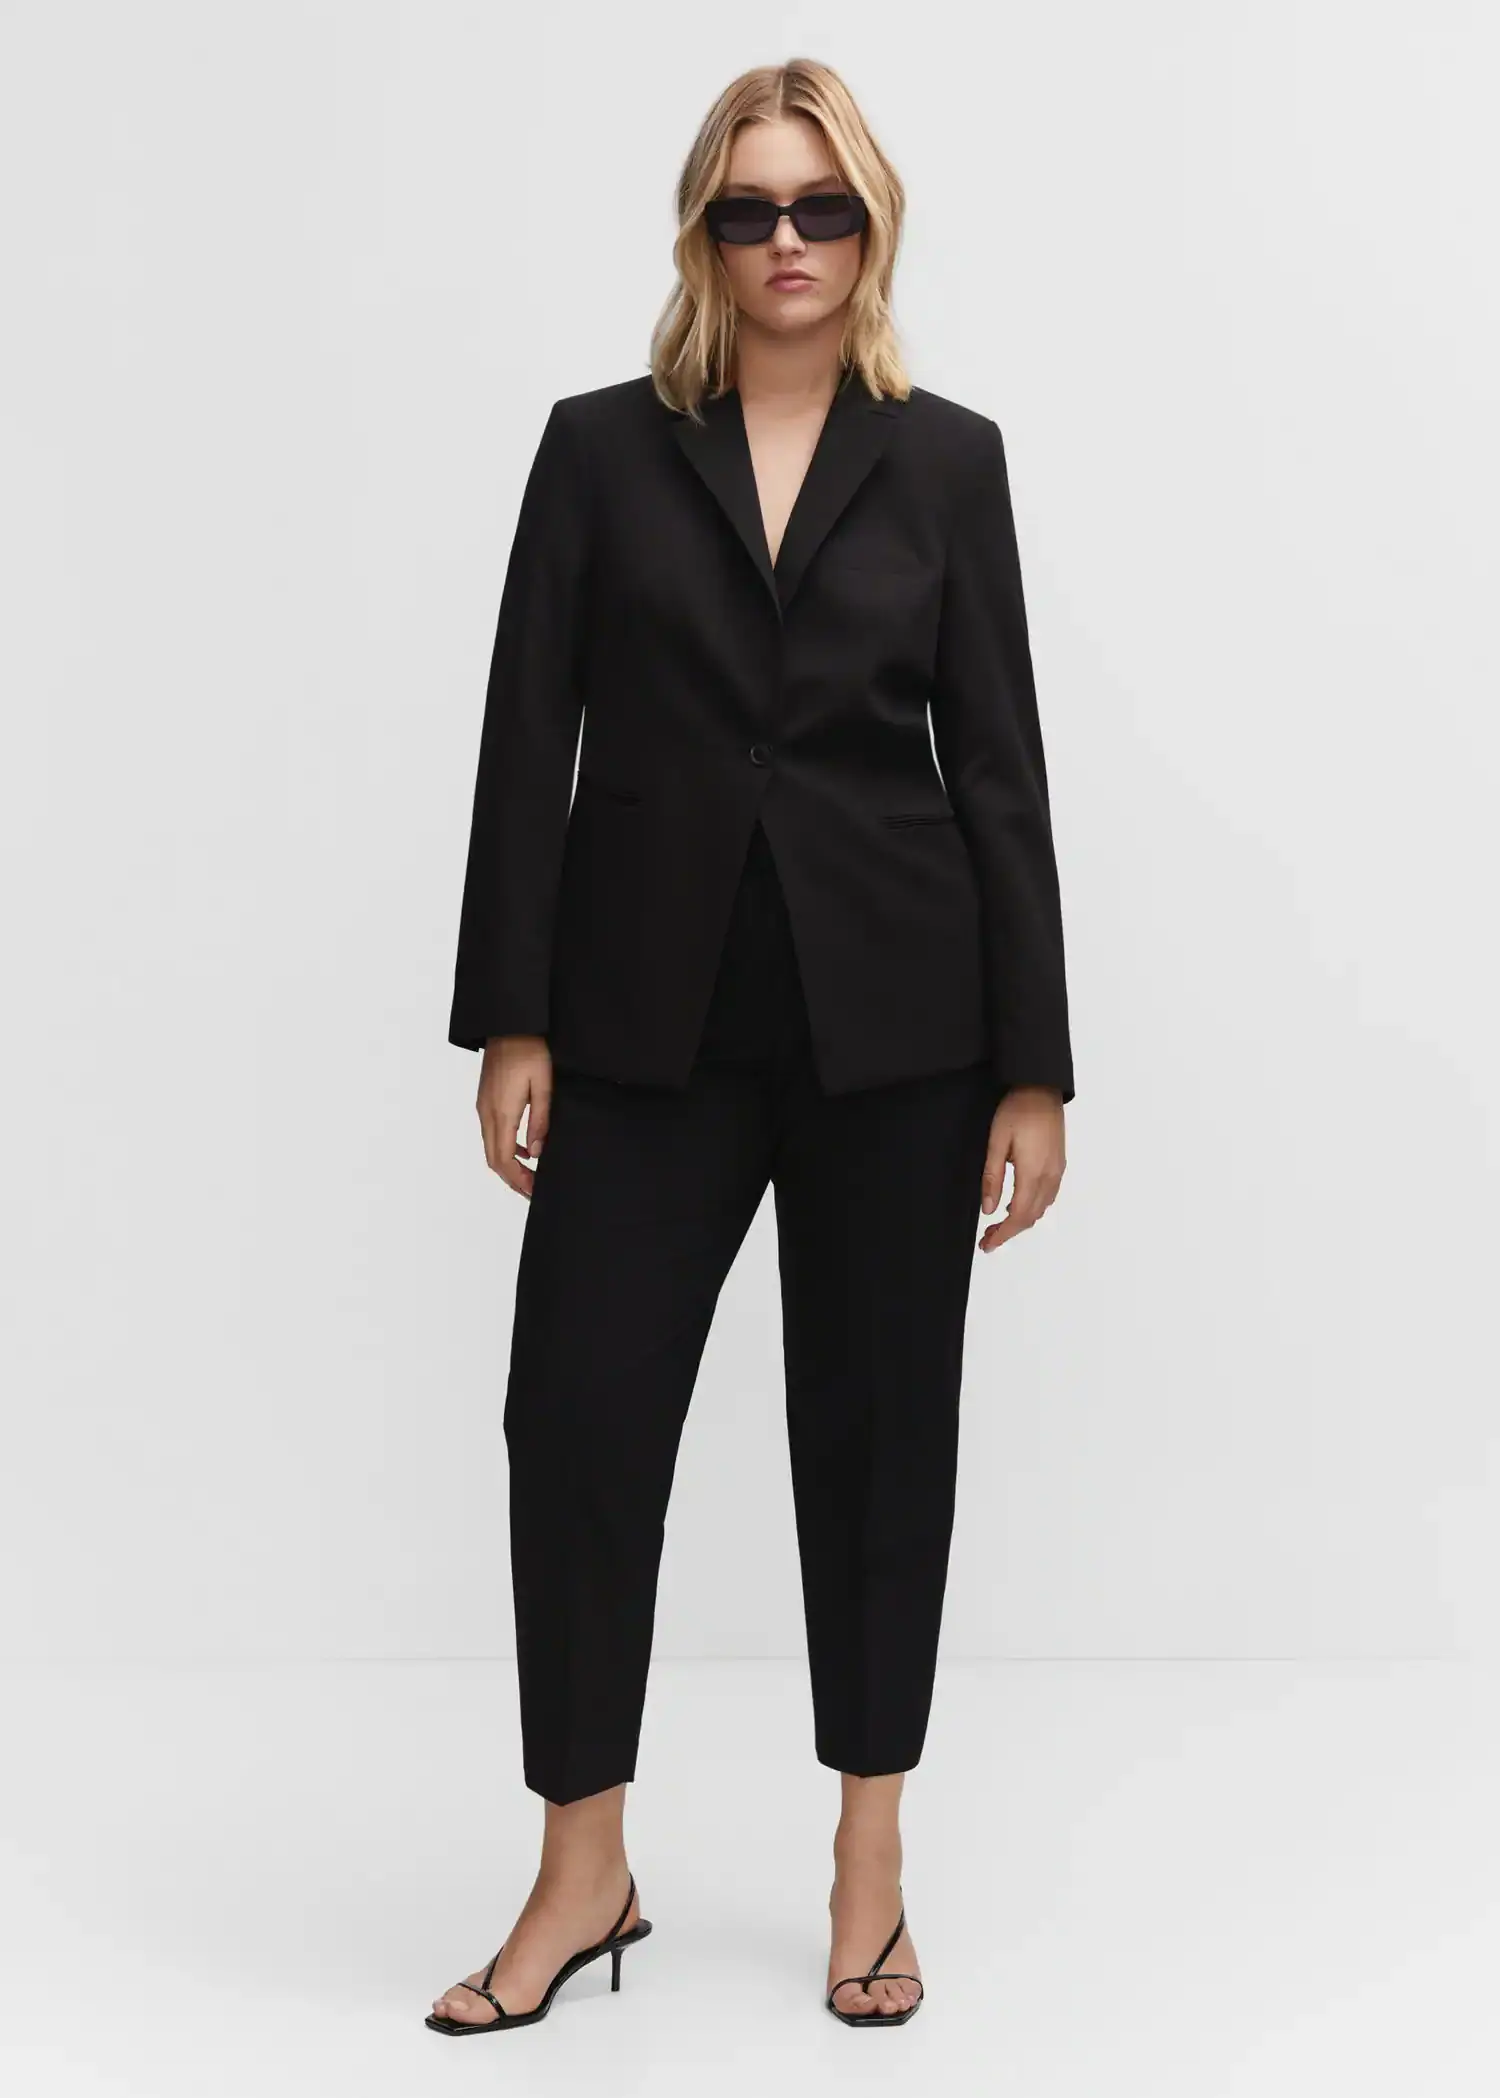 Mango Fitted suit jacket. a woman wearing a black suit standing in front of a white wall. 